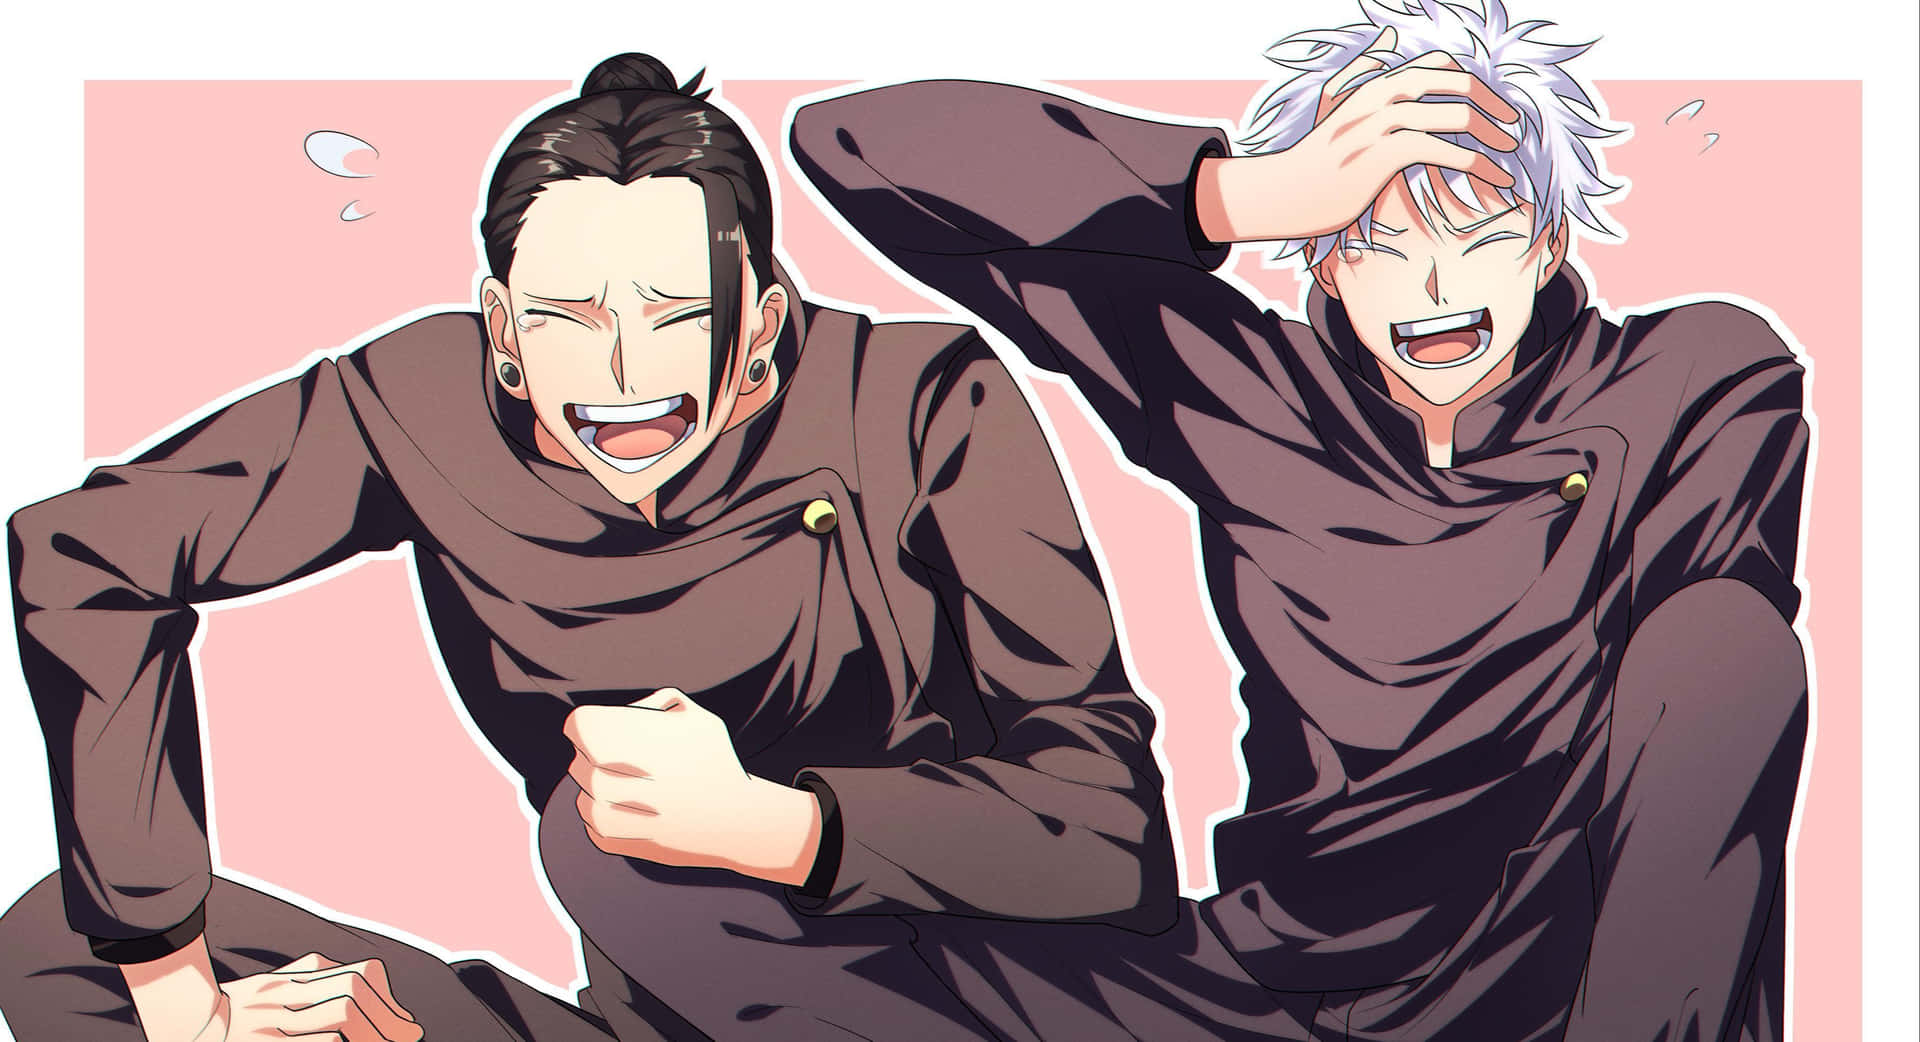 Laughing Anime Characters Illustration Wallpaper